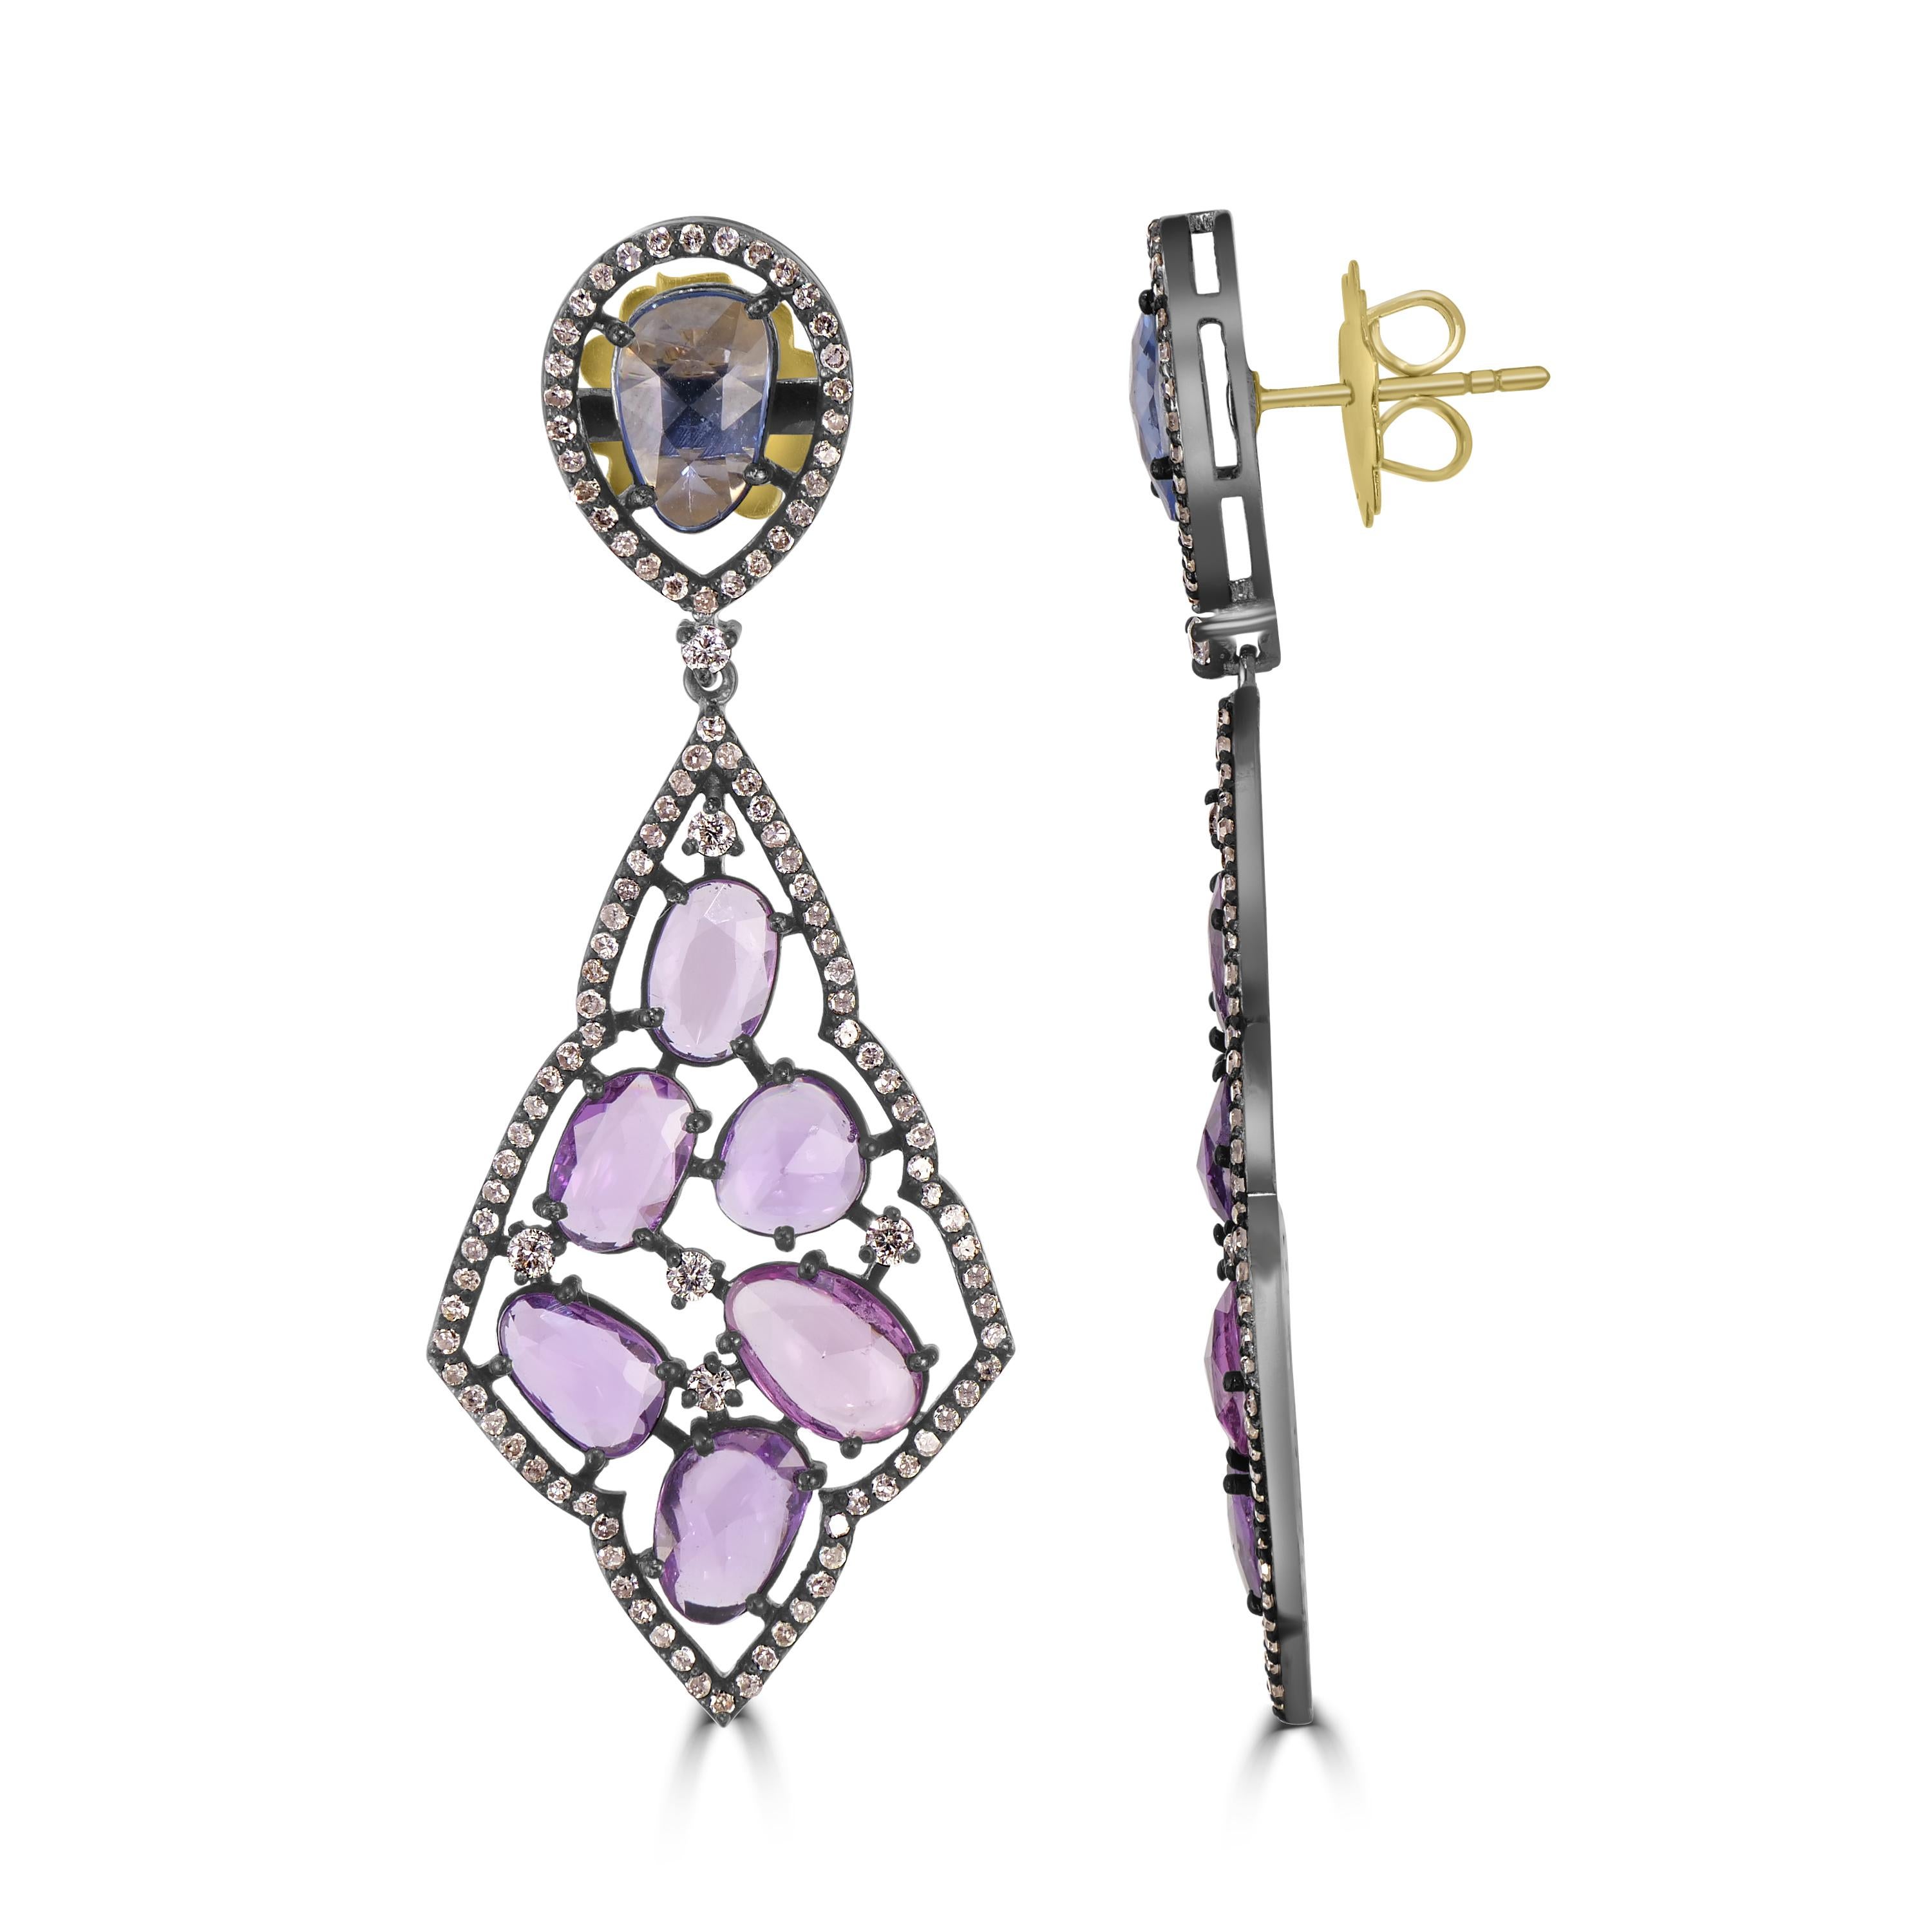 In these striking dazzling Victorian danglers, a pair of faceted blue sapphires are framed within diamonds at the top complemented with drops embellished with faceted purple sapphires prong set within a pierced frame of more diamonds. Finely crafted